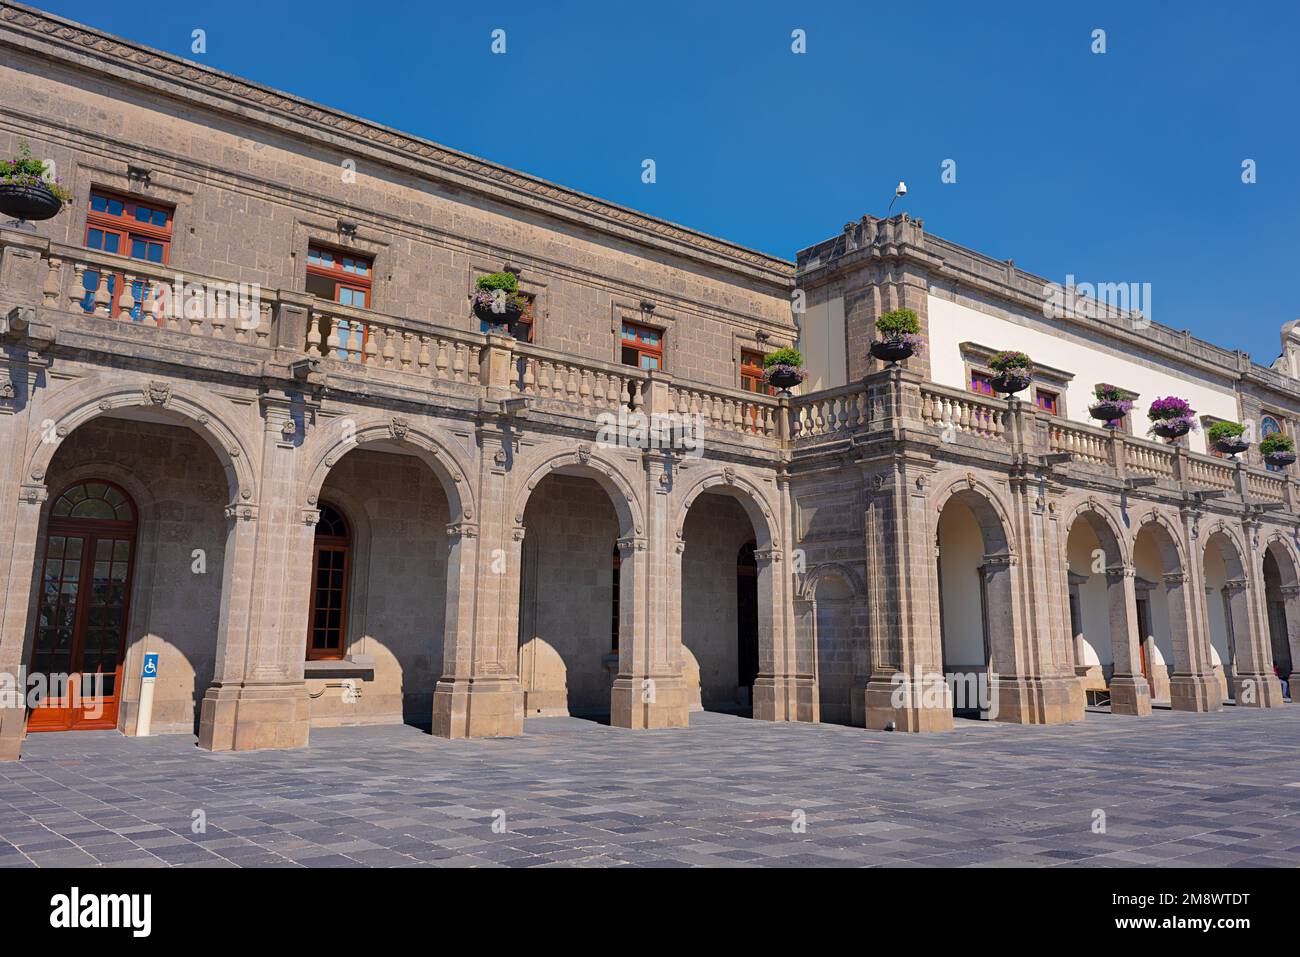 CDMX, CDMX, 11 12 22, Chapultepec castle main entrance with lavender flower arrangements on the second floor, on a cloudless day, no people Stock Photo